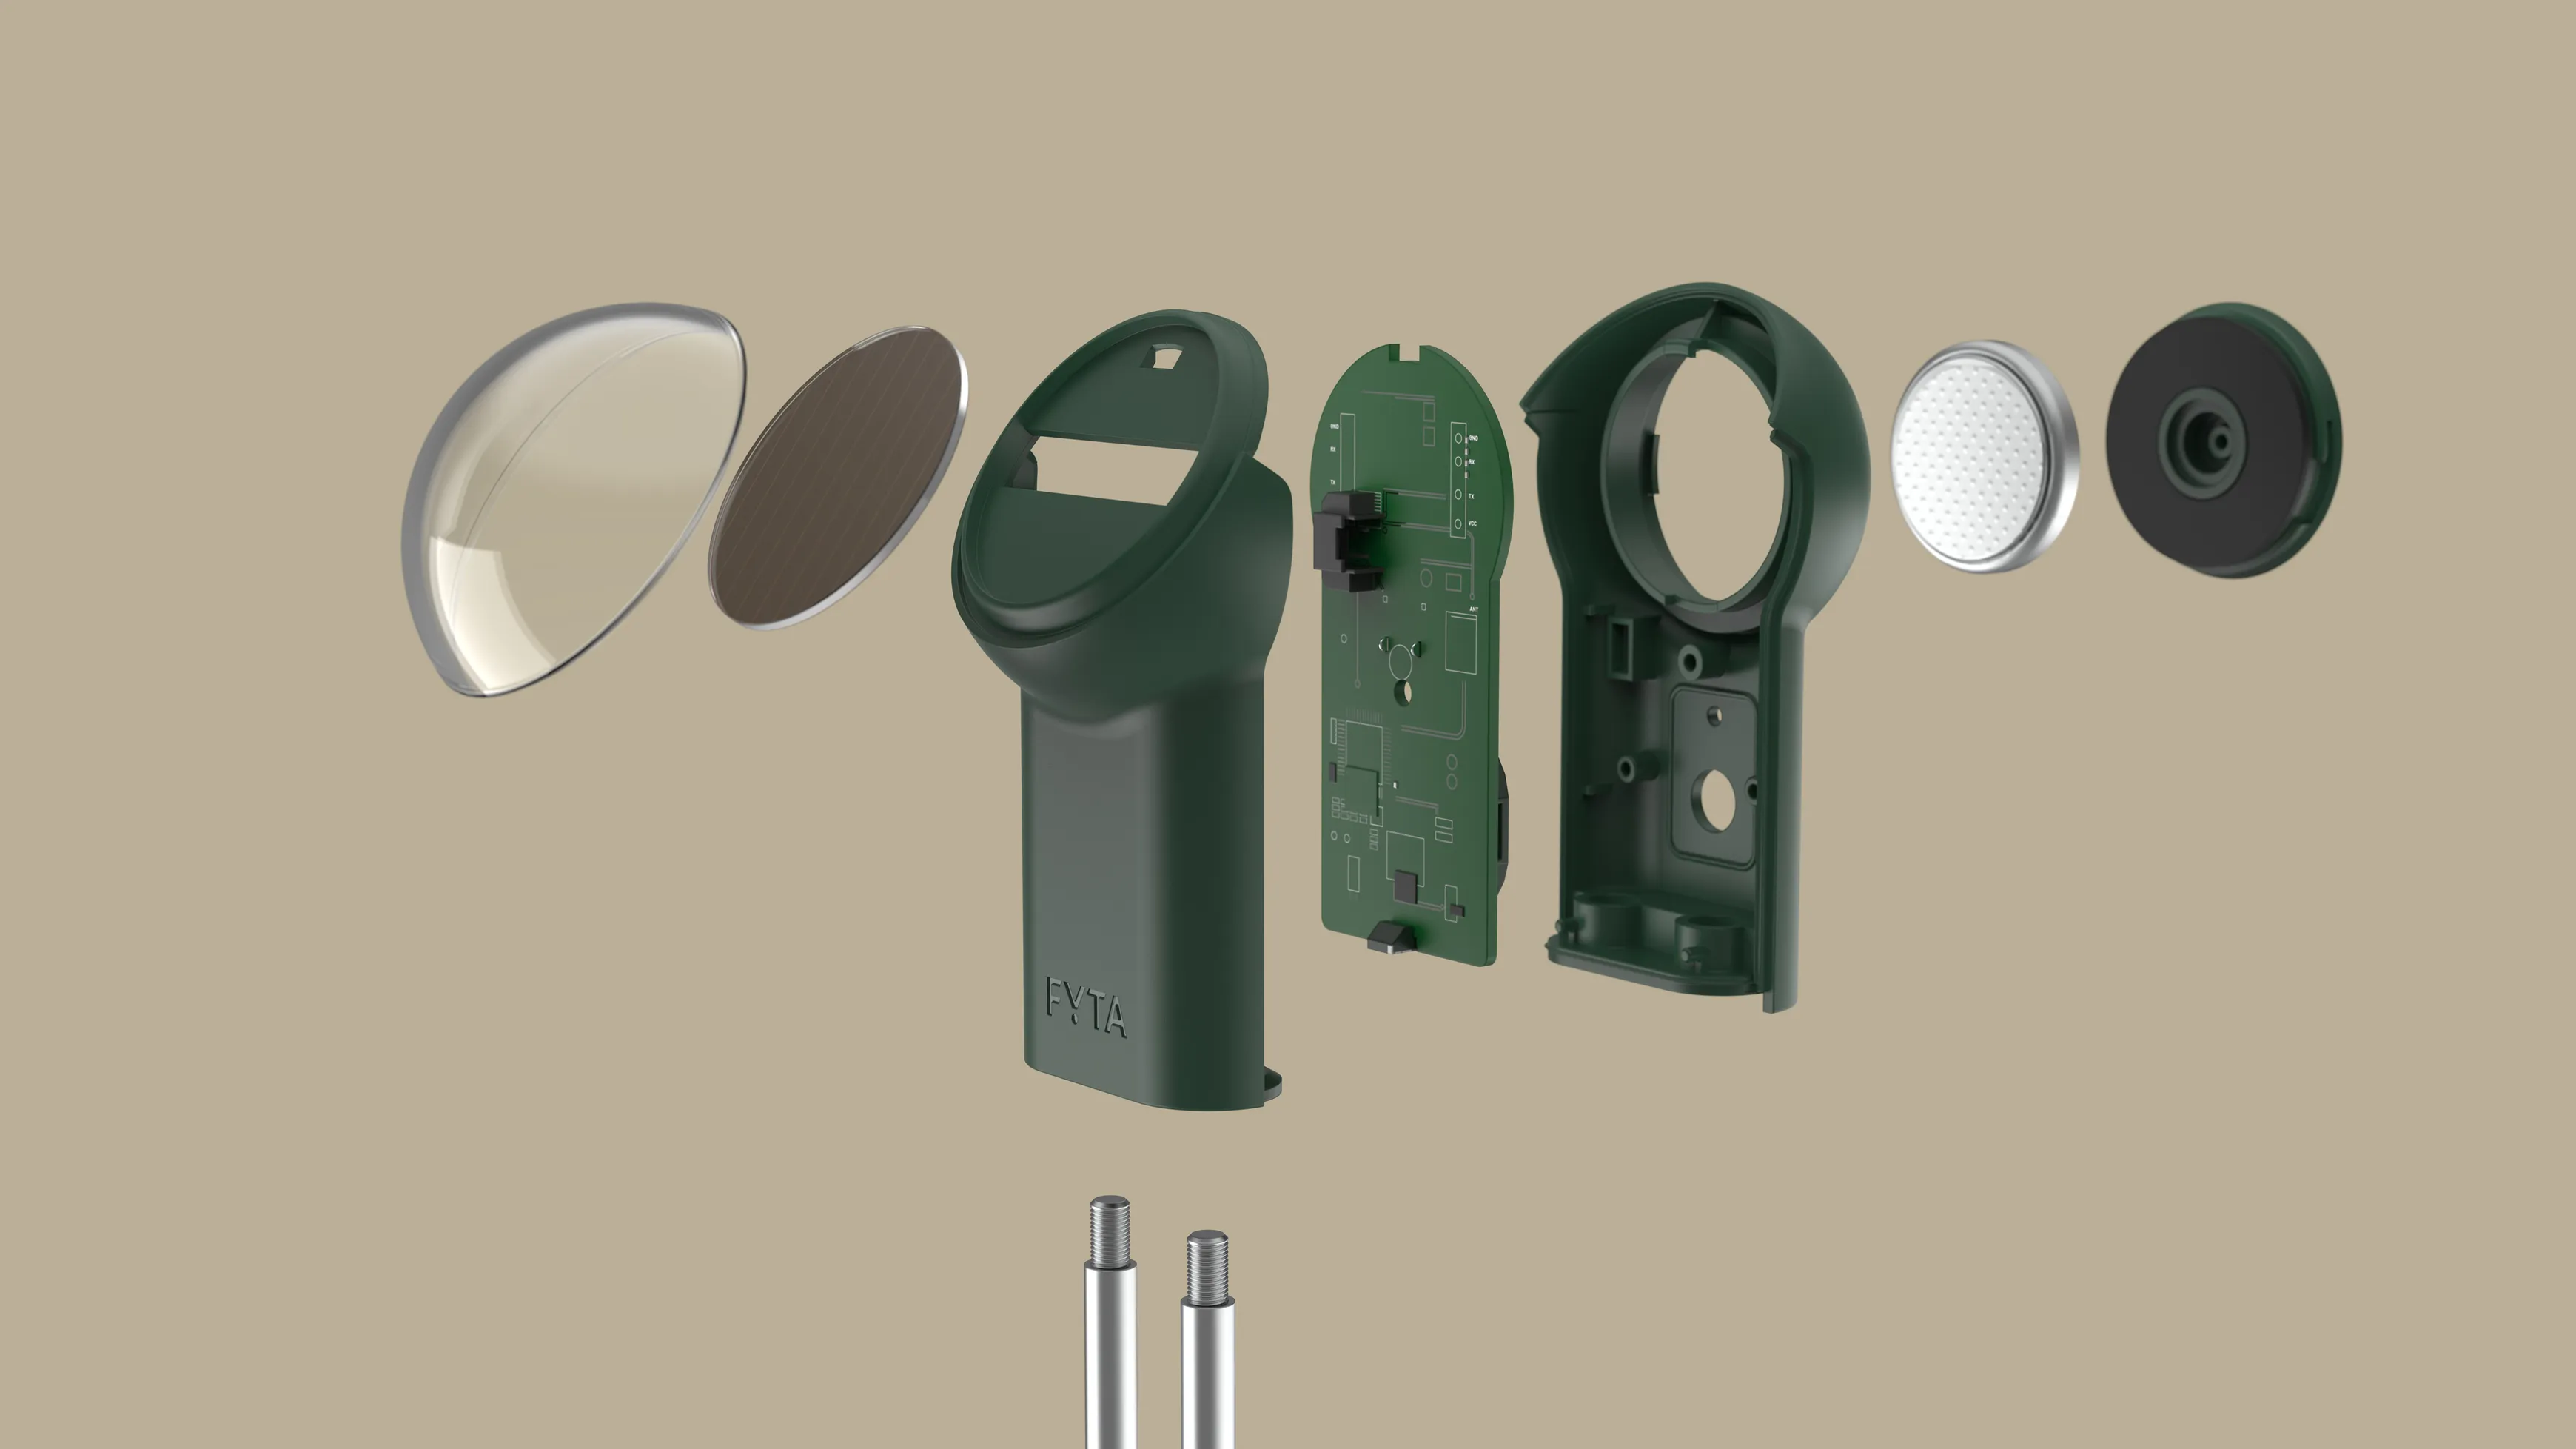 An exploded view of a Fyta smart plant sensor showing all its components